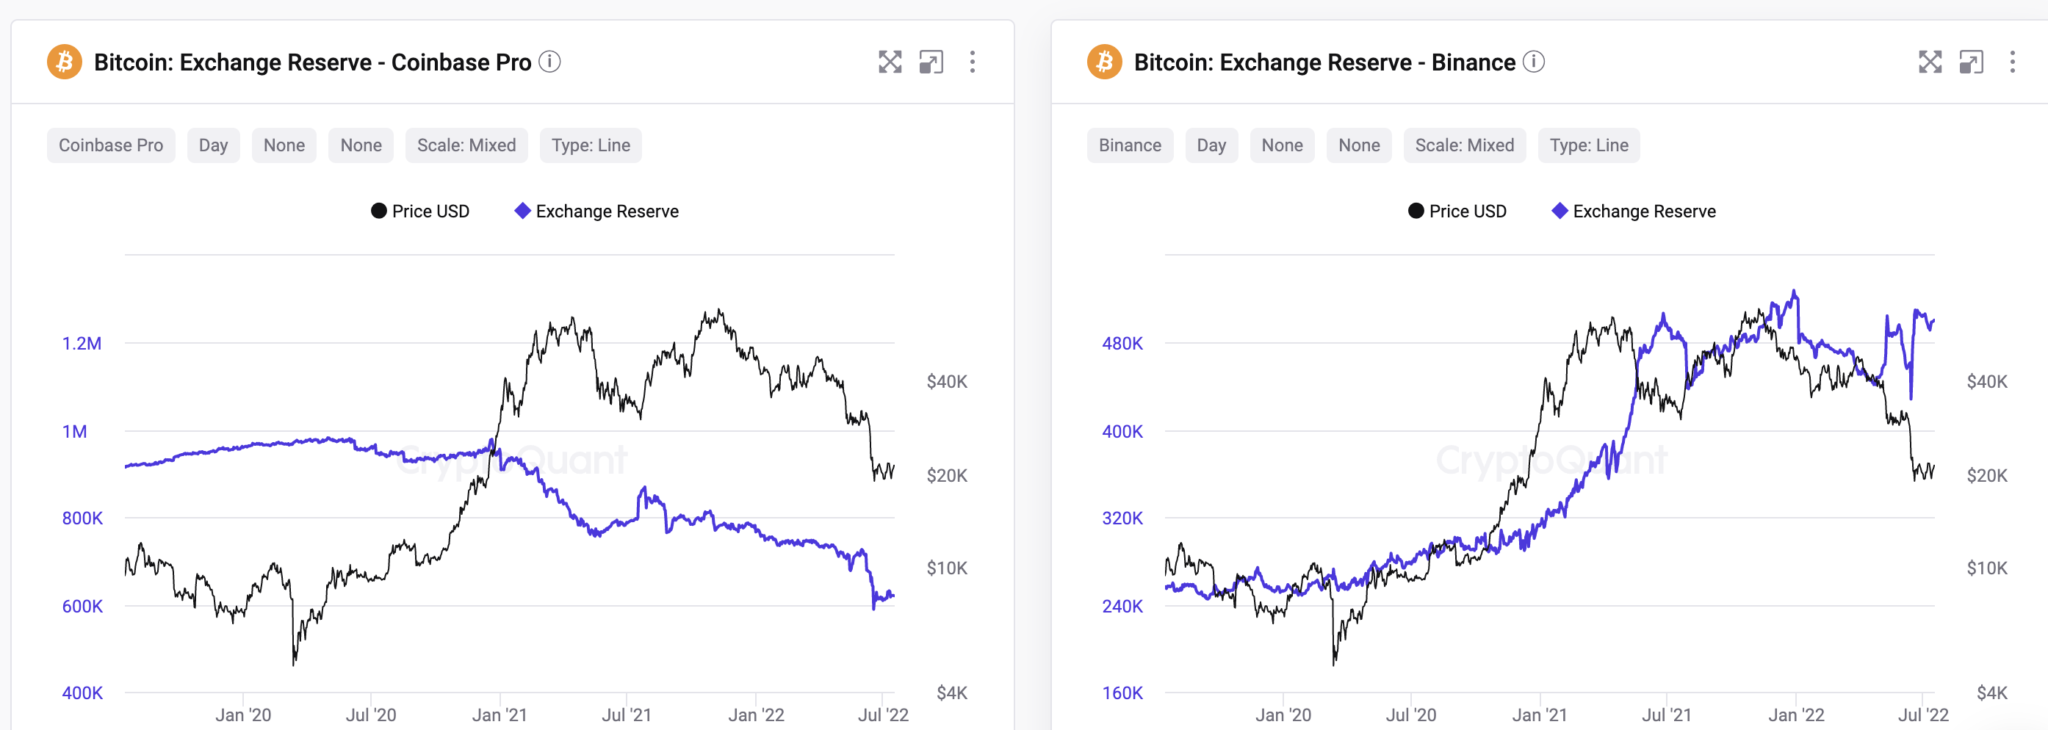 Comparing Amount of Stable Coins in Reserve

Figure 01: Bitcoin Exchange Reserve, Coinbase Pro 
A plateau from Jan 2020 to Jan 2021 can be observed followed by a steady decline till July 2022. 

Figure 02: Bitcoin Exchange Reserve, Binance
A steady upward trend from Jan 2020 till July 2022.